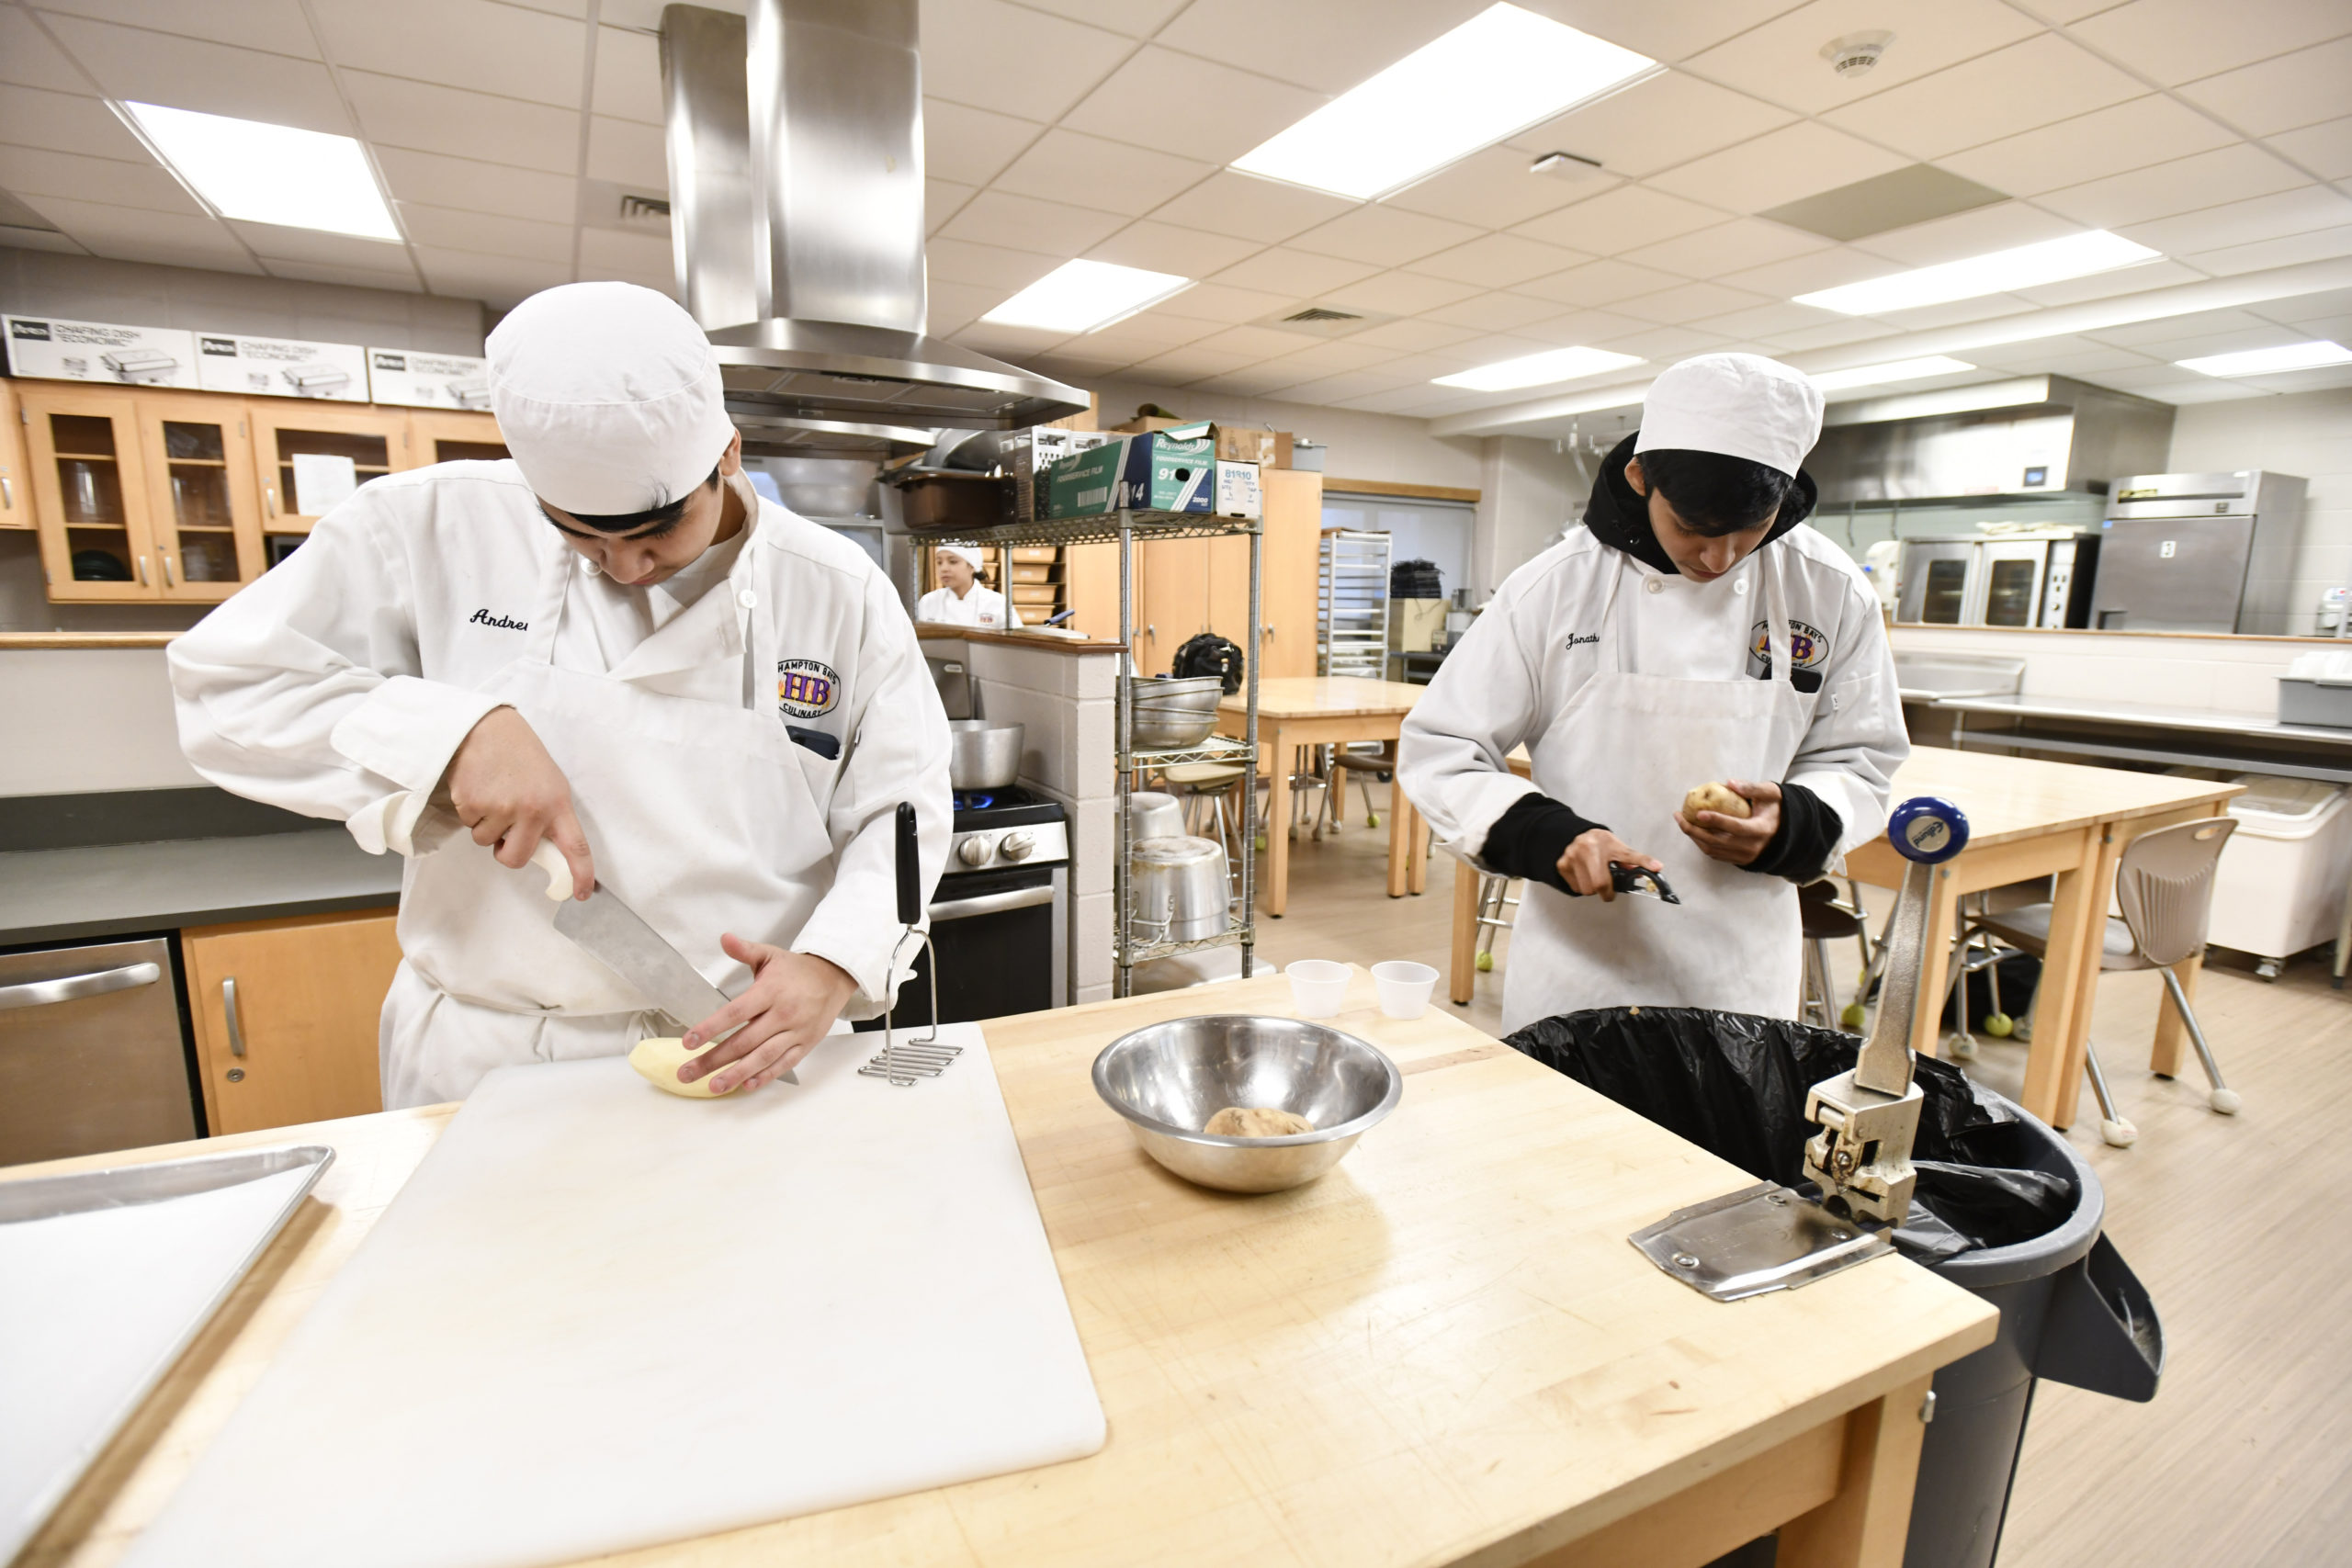 Students Andrew Avila and Jonathan Aquilar at work in the kitchen during the culinary class at Hampton Bays High School.  DANA SHAW